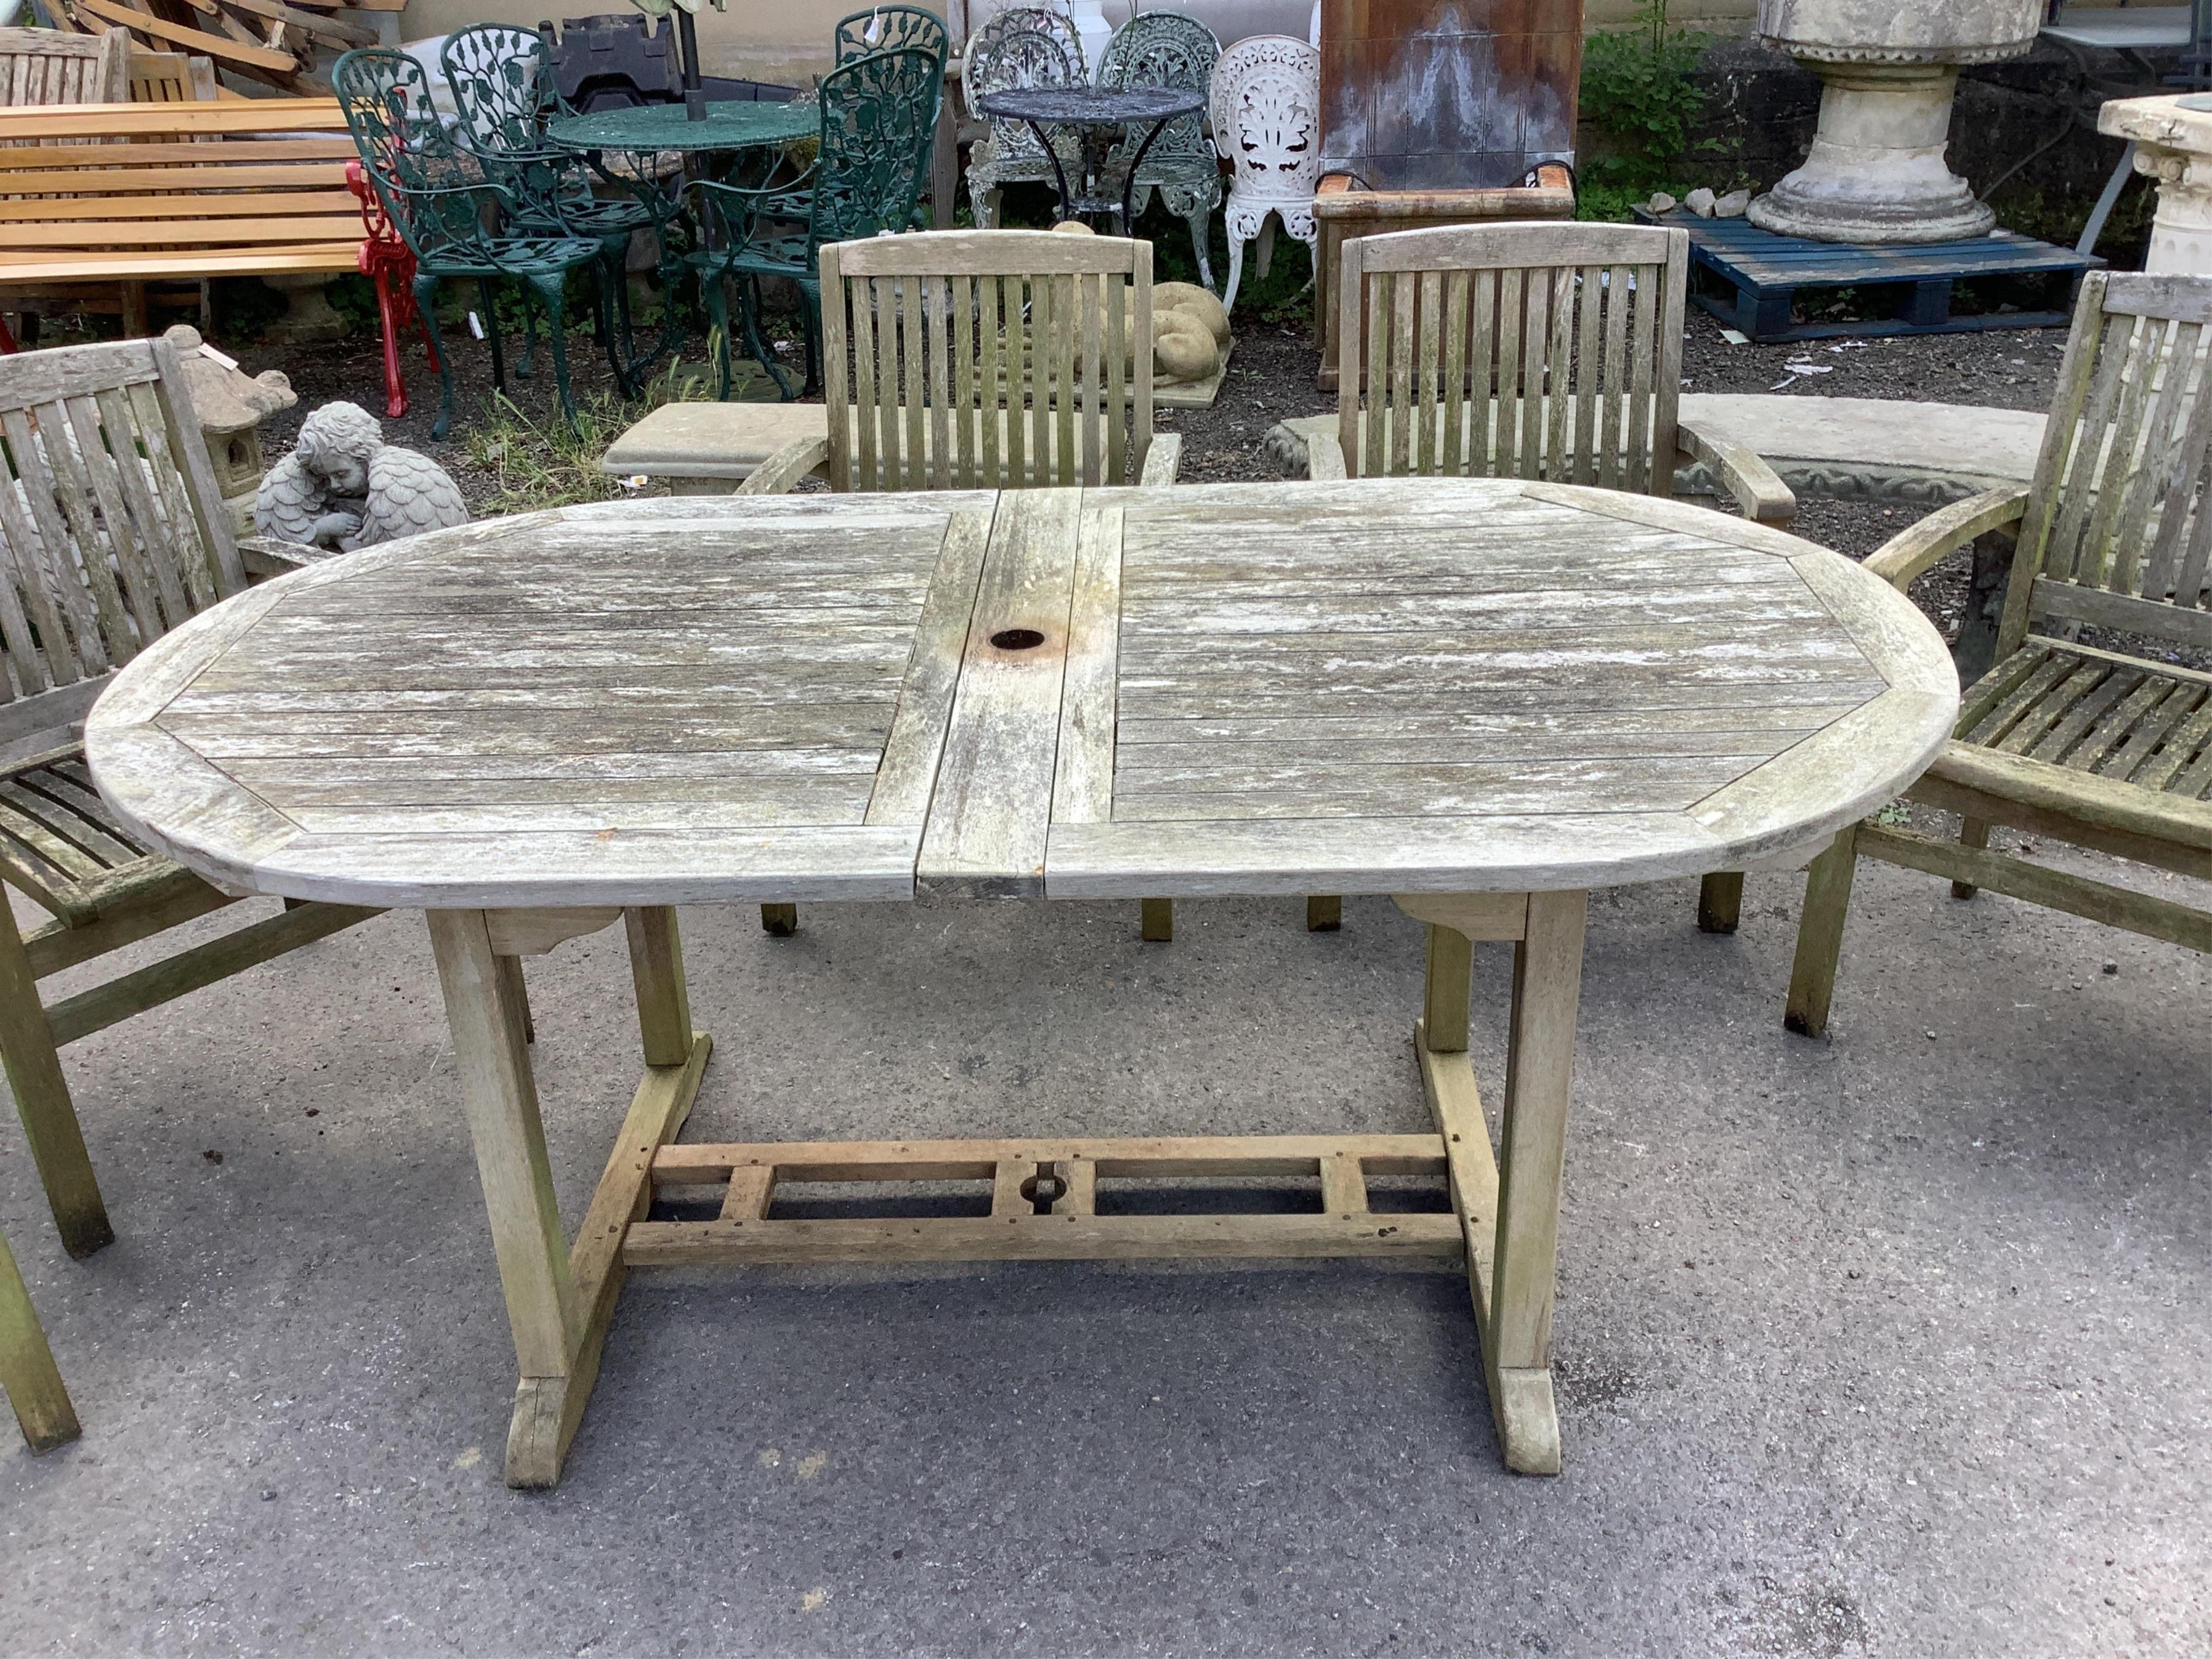 A “Kyoto” weathered teak extending garden table, width 240cm extended, depth 100cm, height 75cm, together with six stacking elbow chairs. Condition - fair